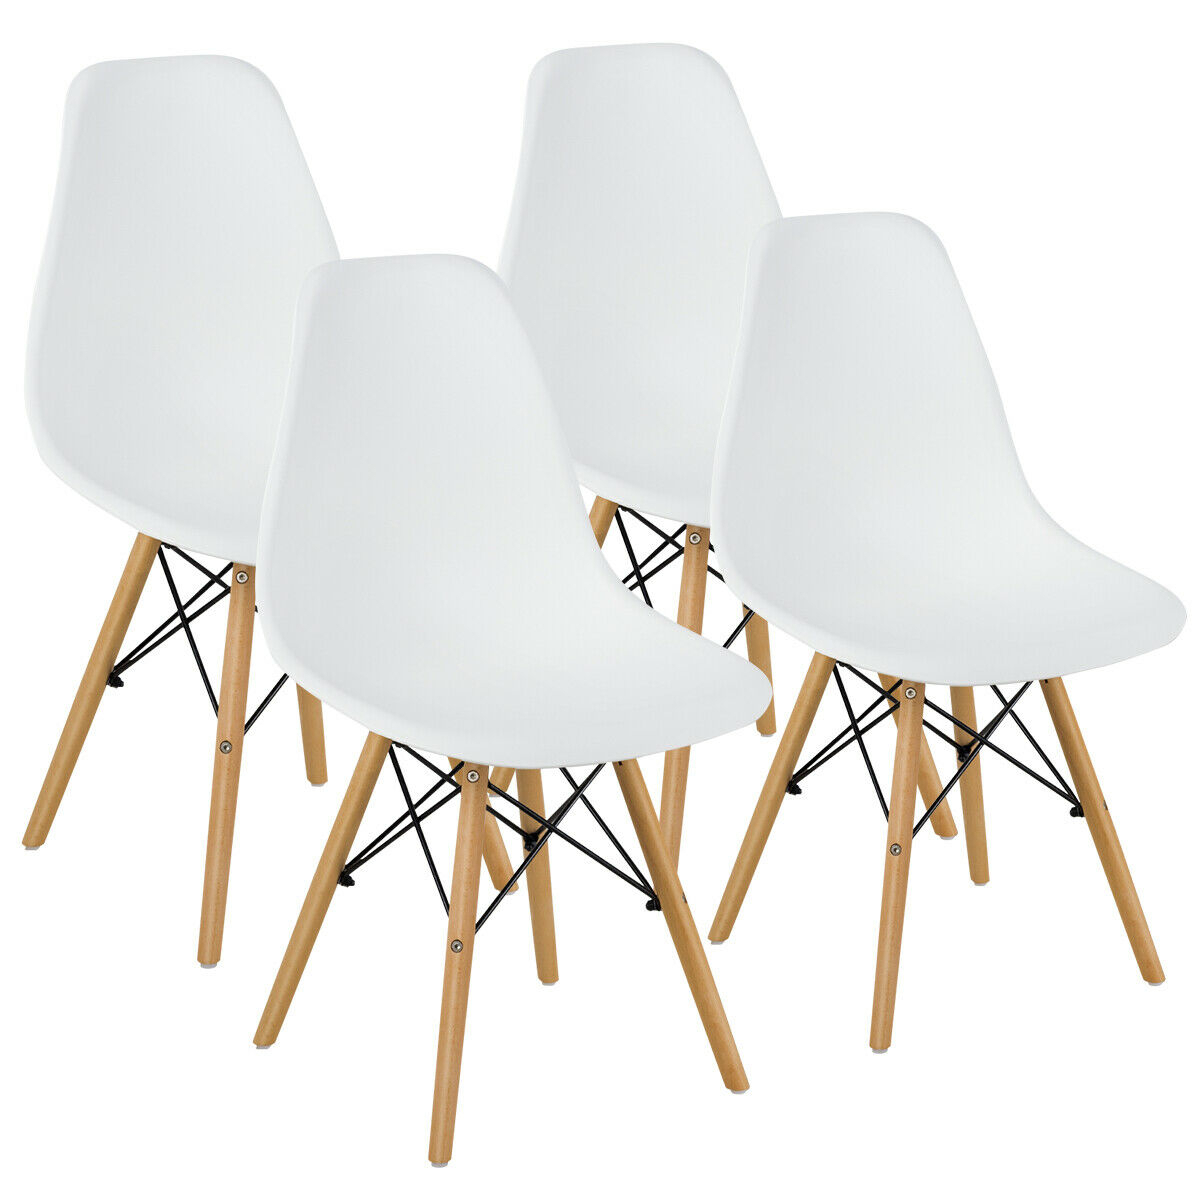 Set Of 4 Modern Dining Side Chairs Armless Home Office W/ Wood Legs White